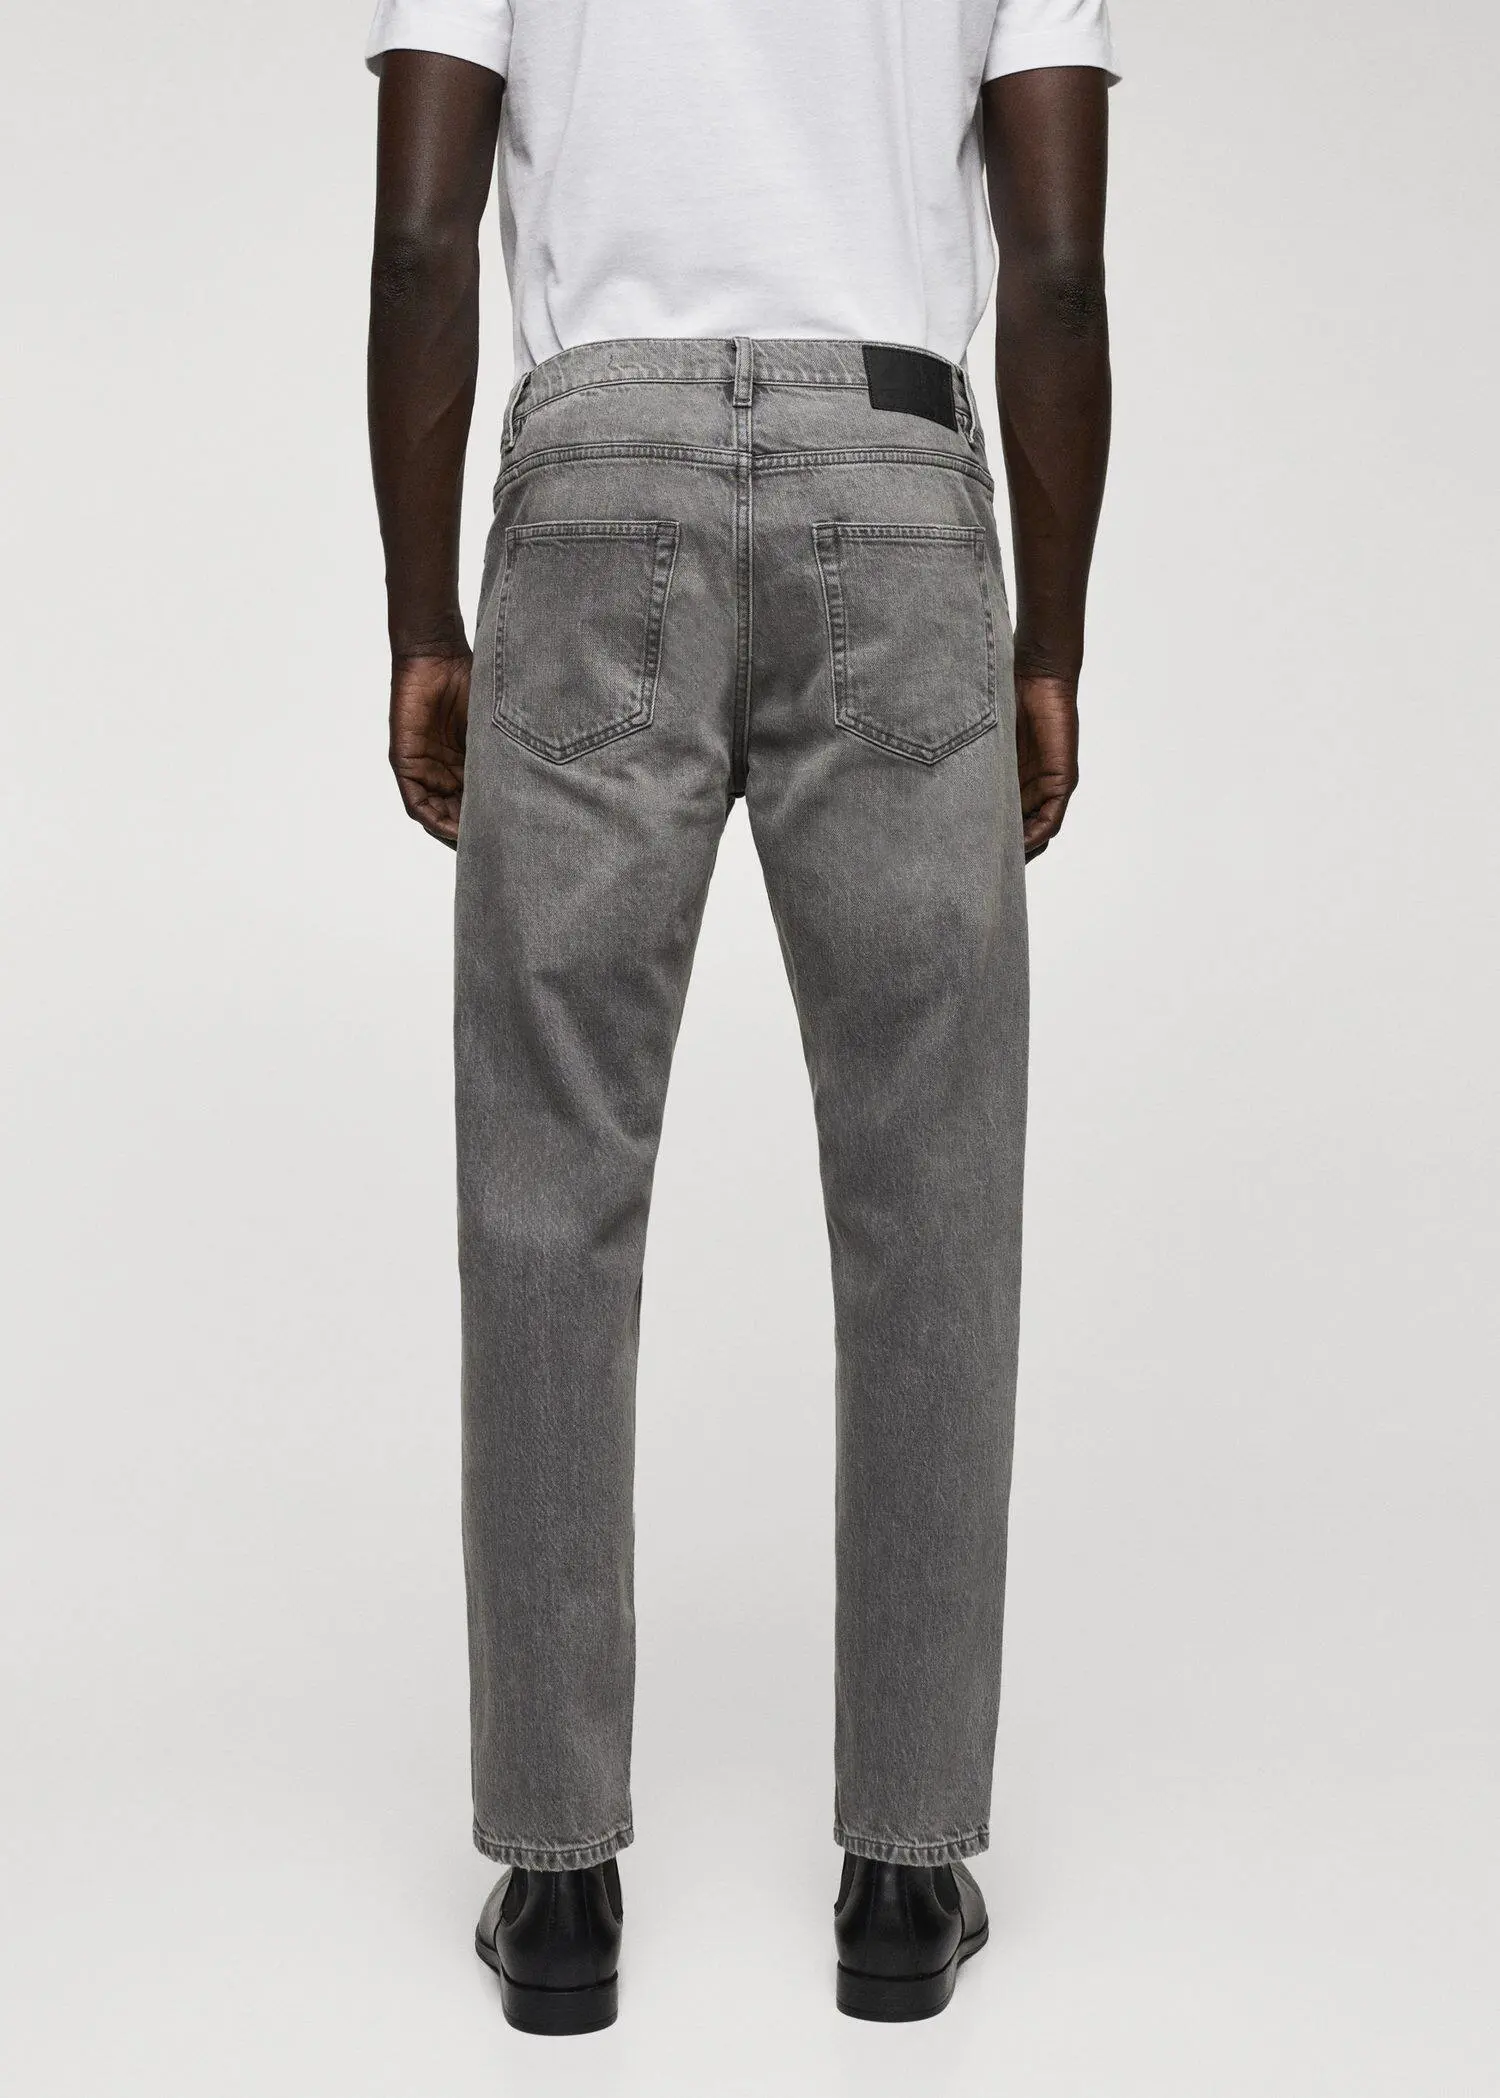 Mango Jeans Ben tappered fit. 3